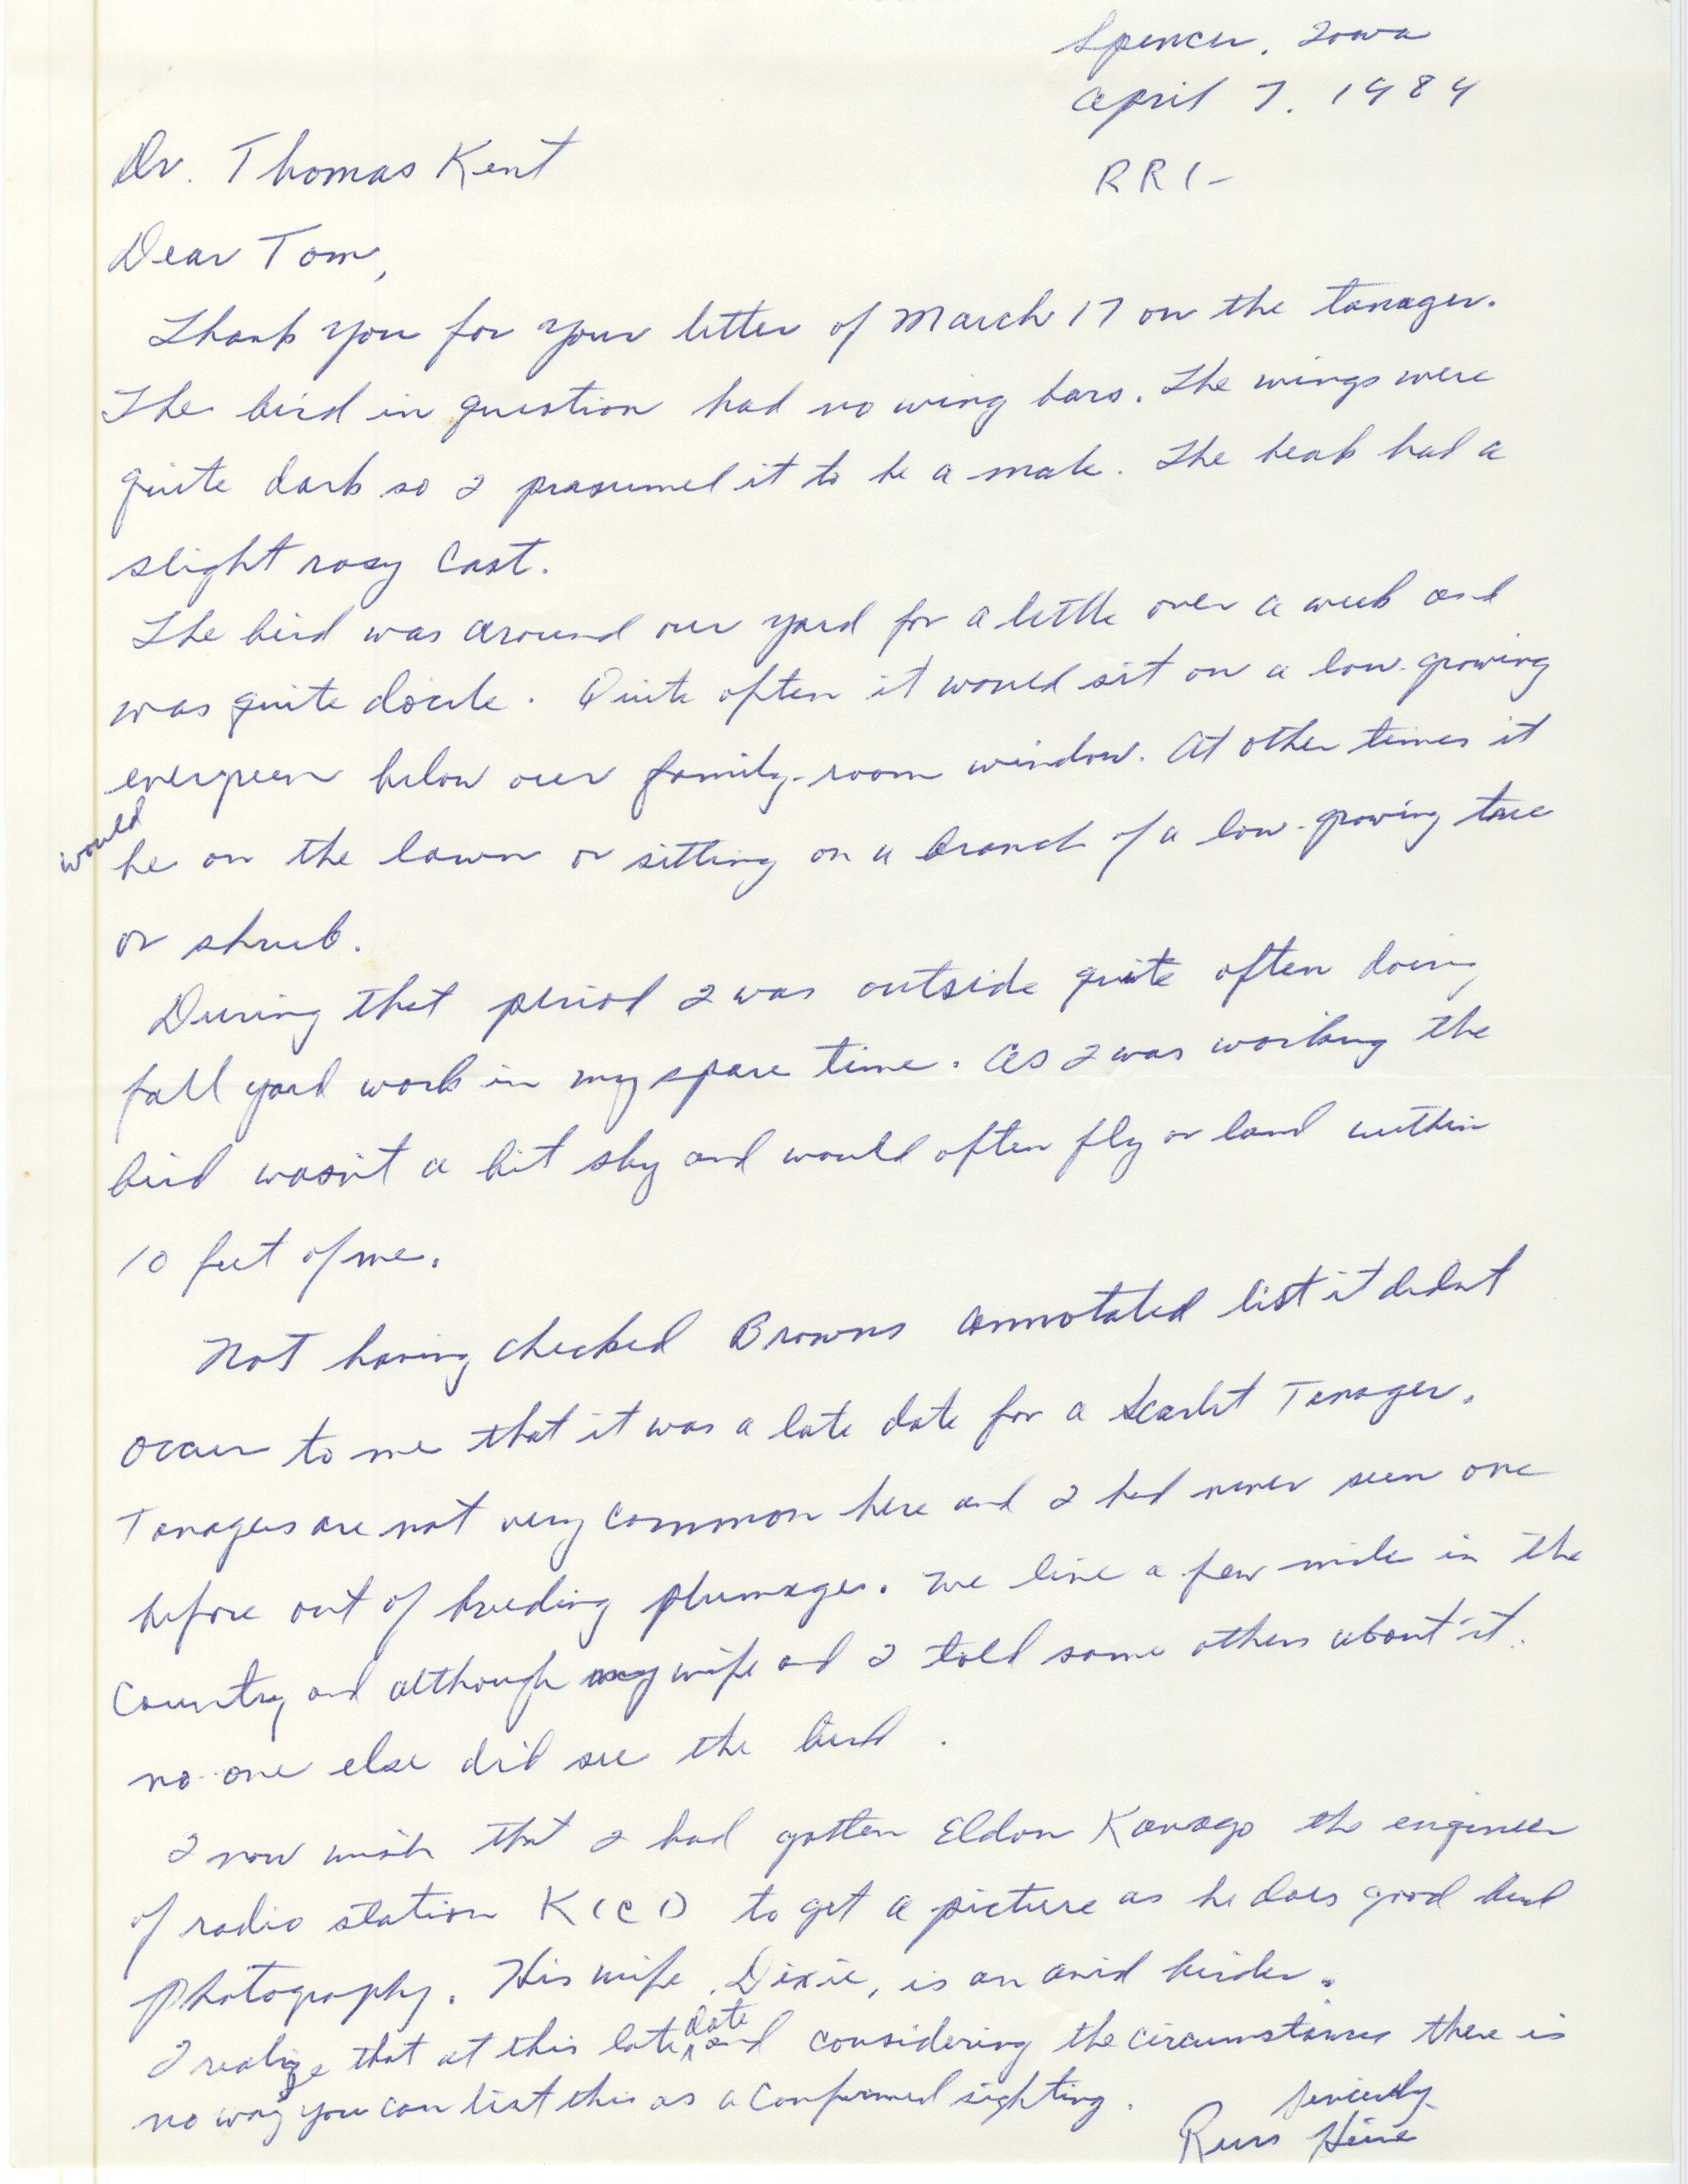 Russell Heine letter to Thomas H. Kent regarding details on late sighting of a Scarlet Tanager, April 7, 1984